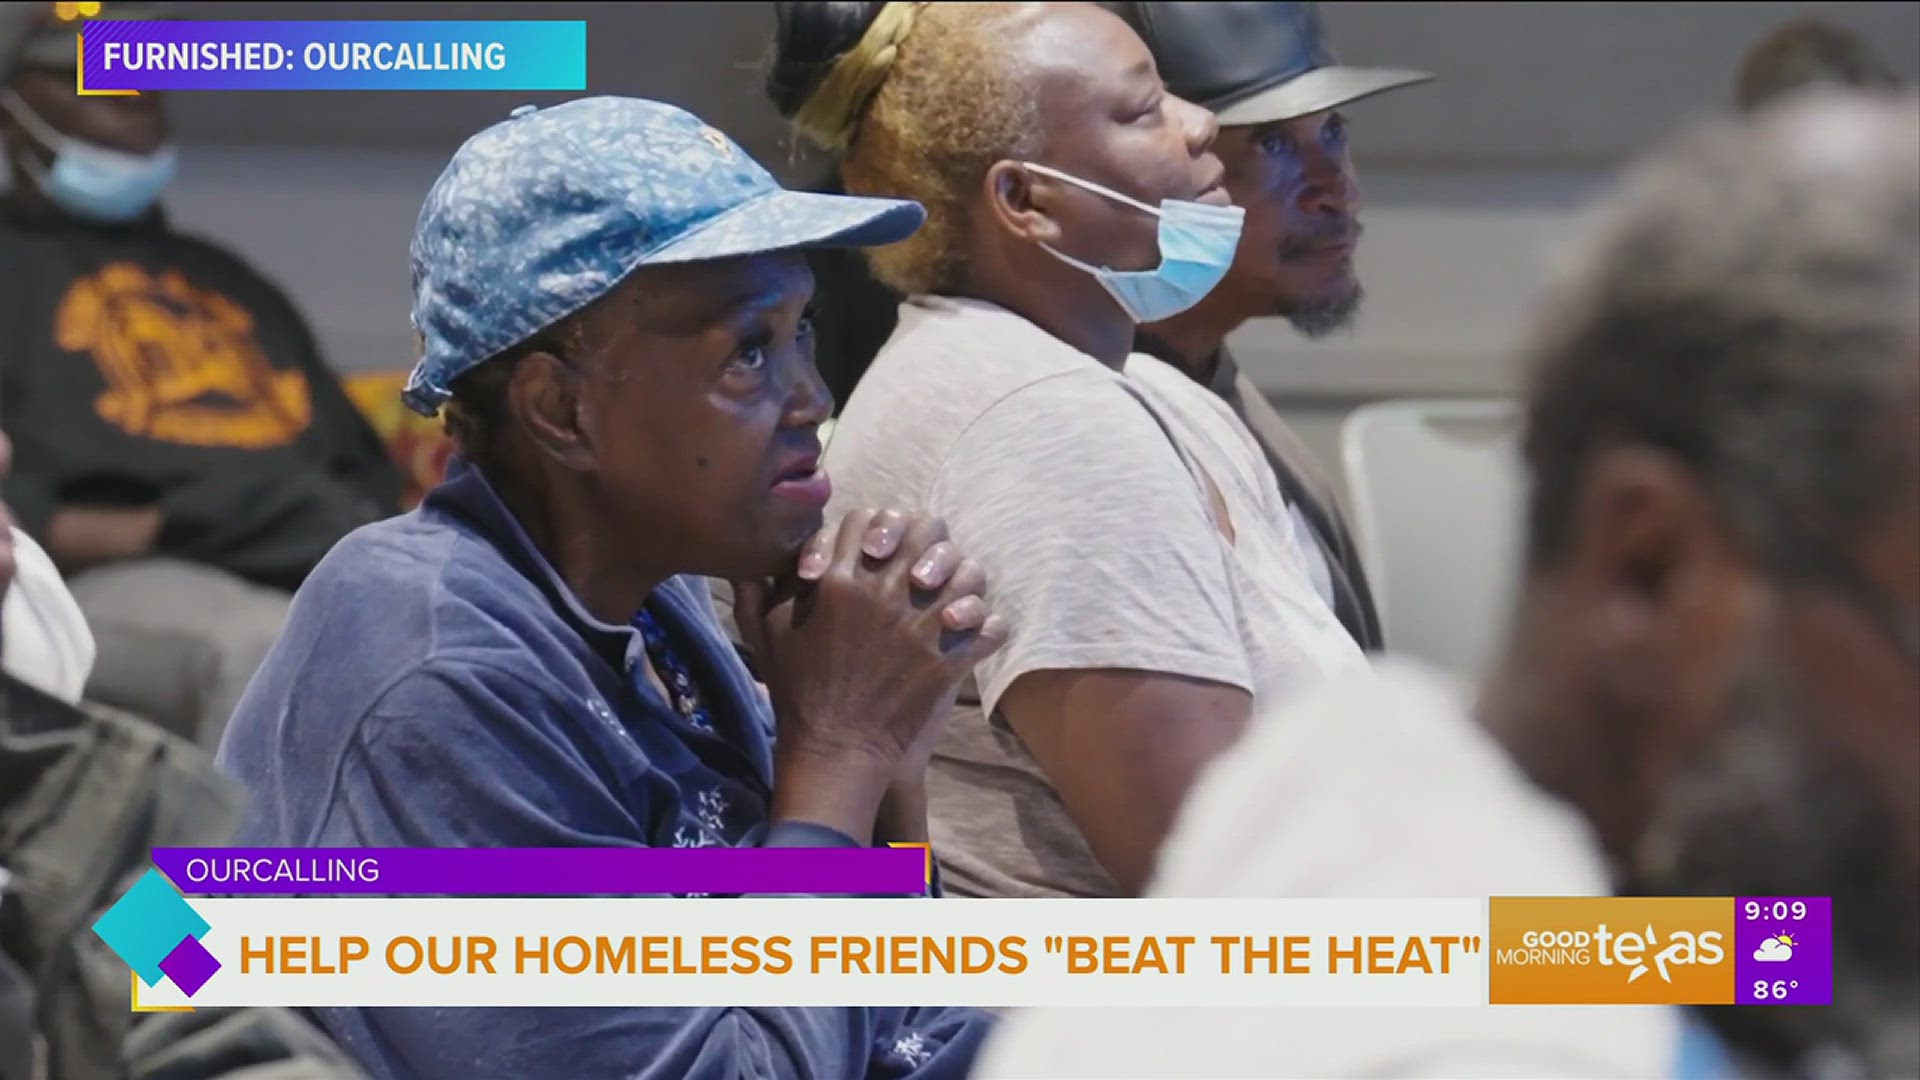 How you can join OurCalling’s mission in helping our homeless neighbors 'Beat the Heat' this season.